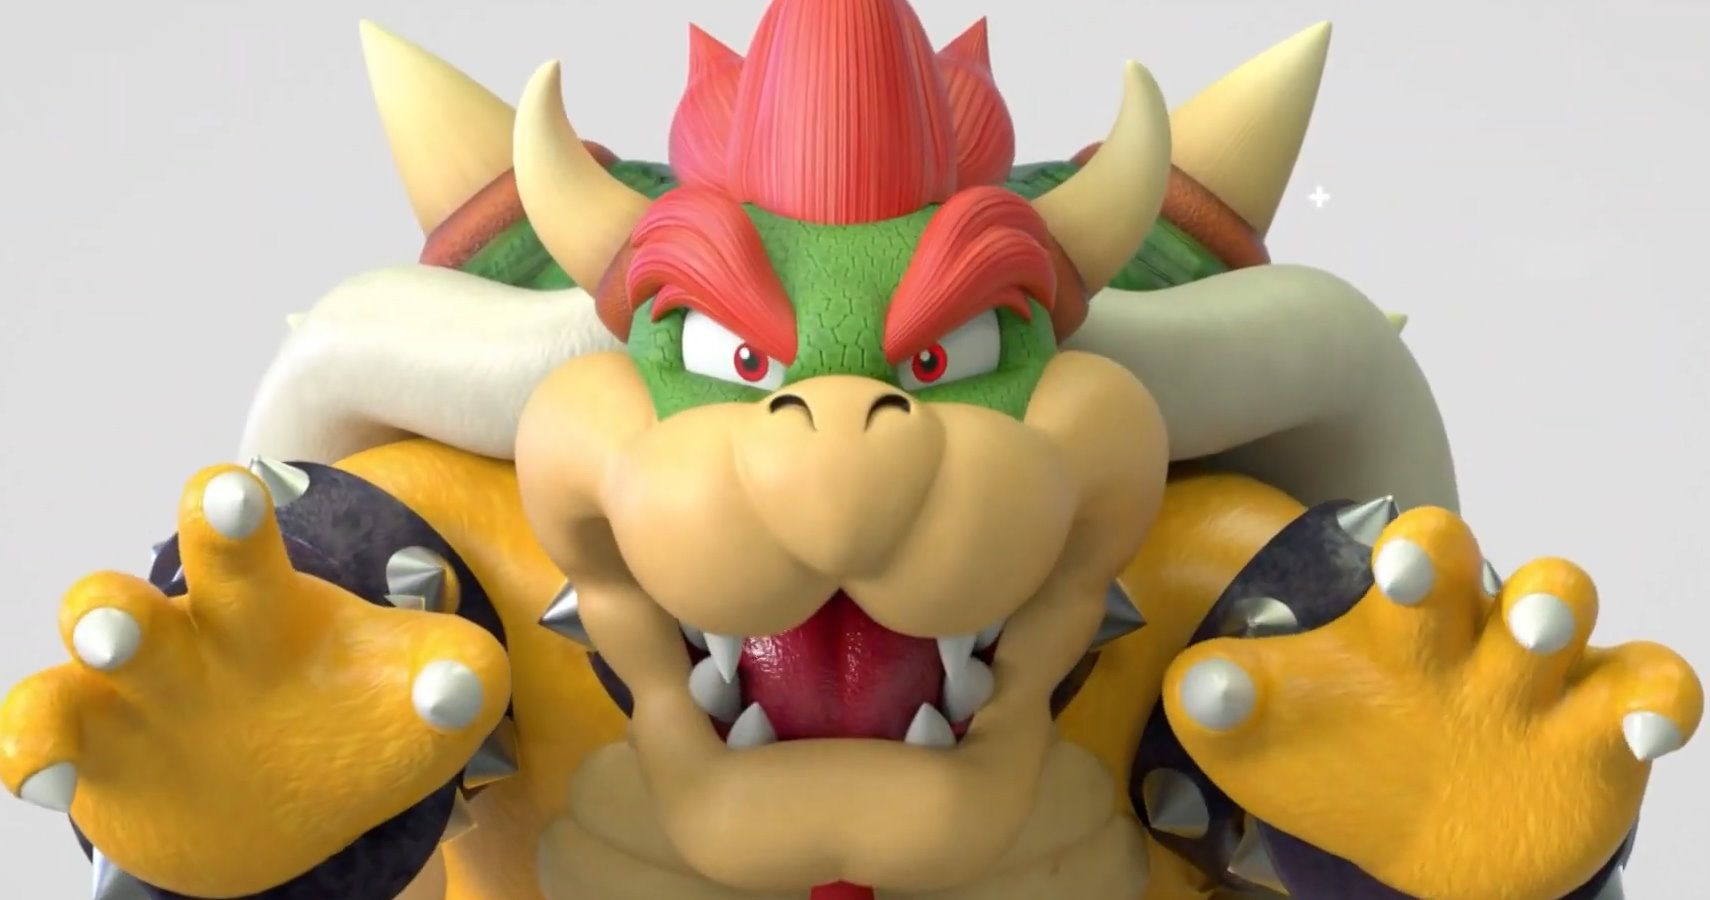 Bowser Congratulates Xbox For A Successful Launch Of The Series X And S